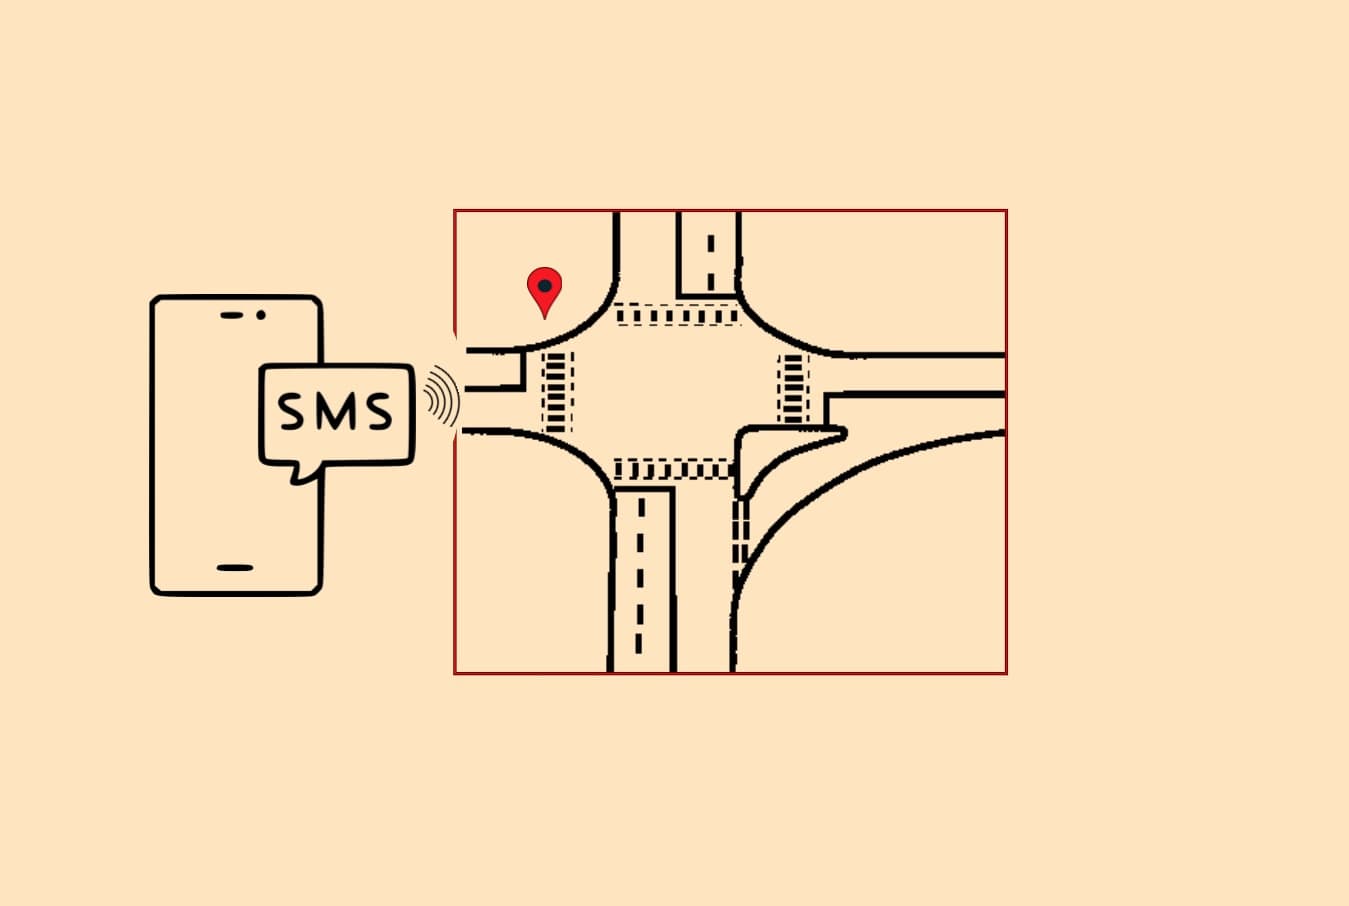 Simjacker vulnerability lets attackers track yoSimjacker vulnerability lets attackers track your location with an SMSur location with an SMS